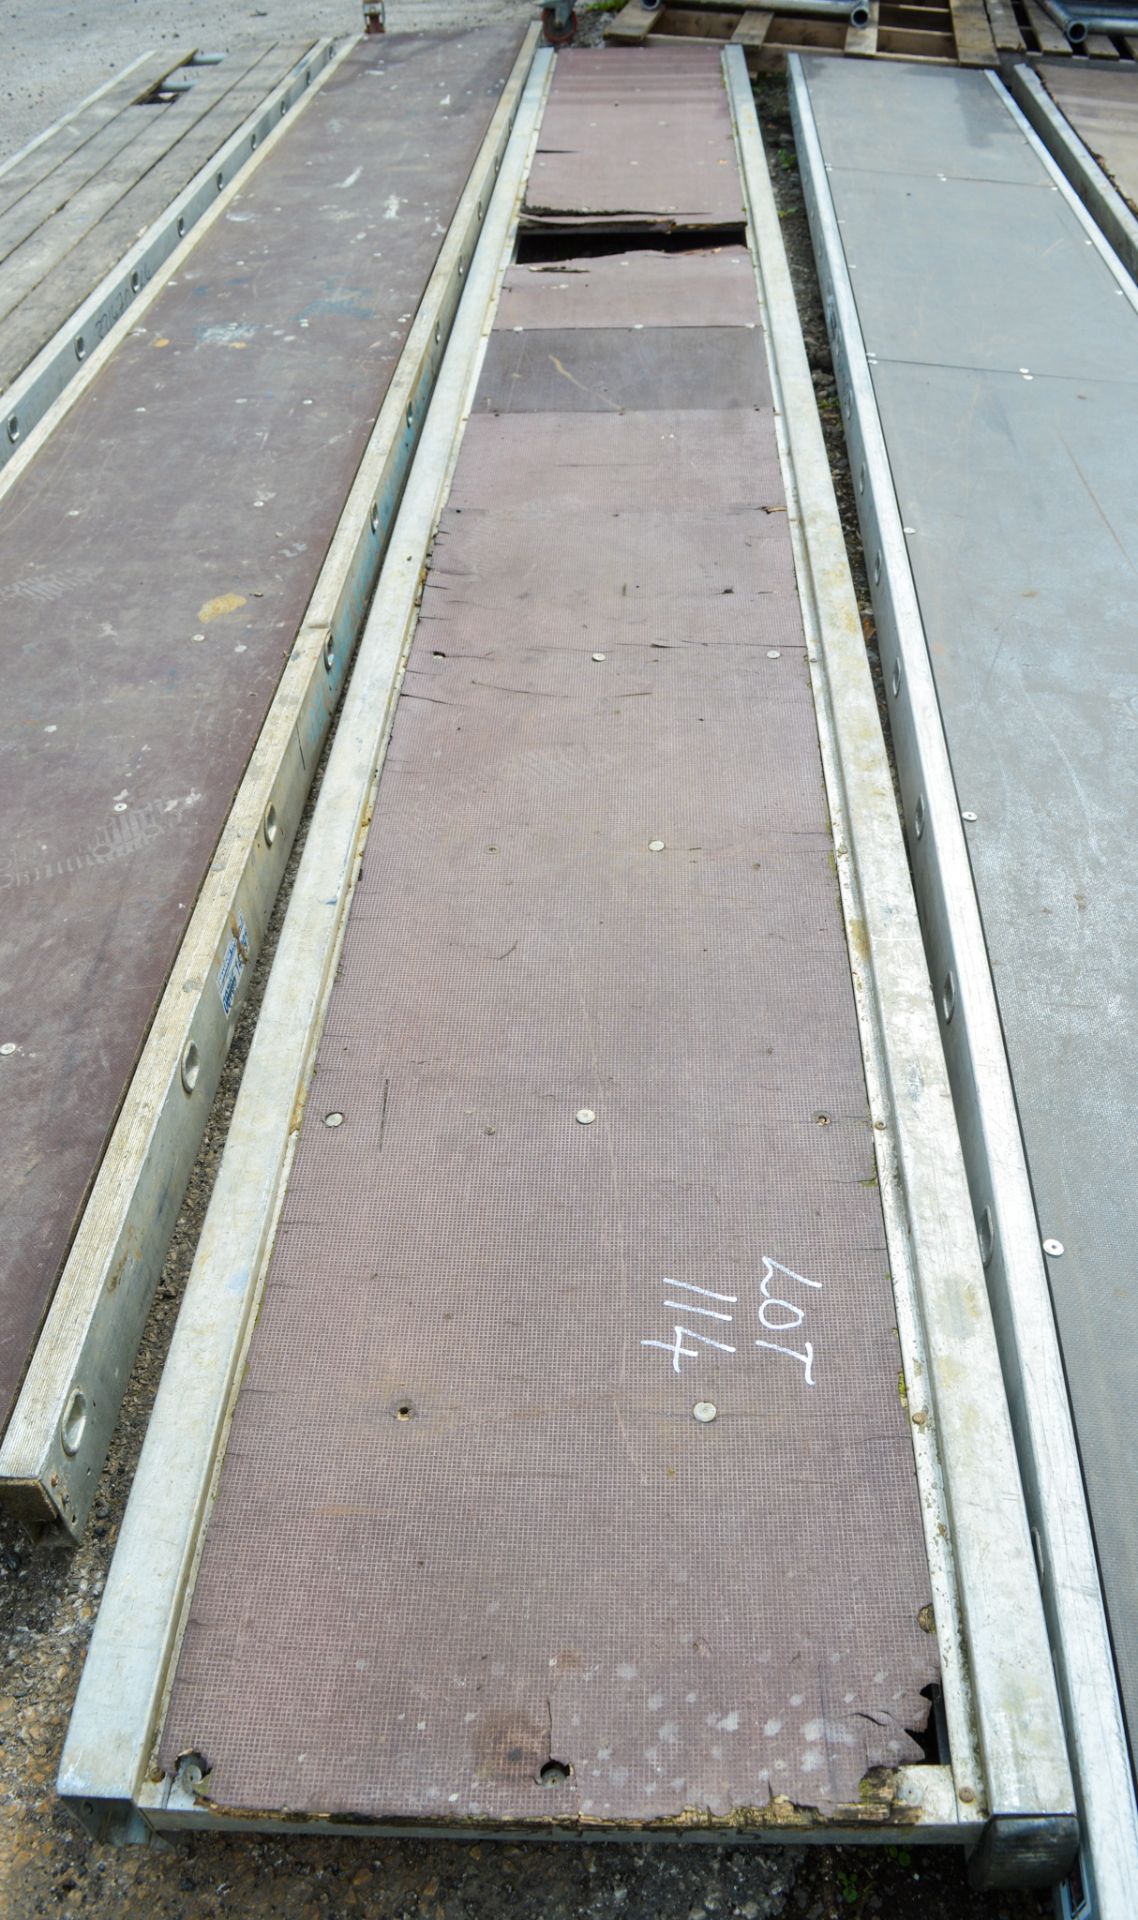 Approximately 16ft aluminium staging board